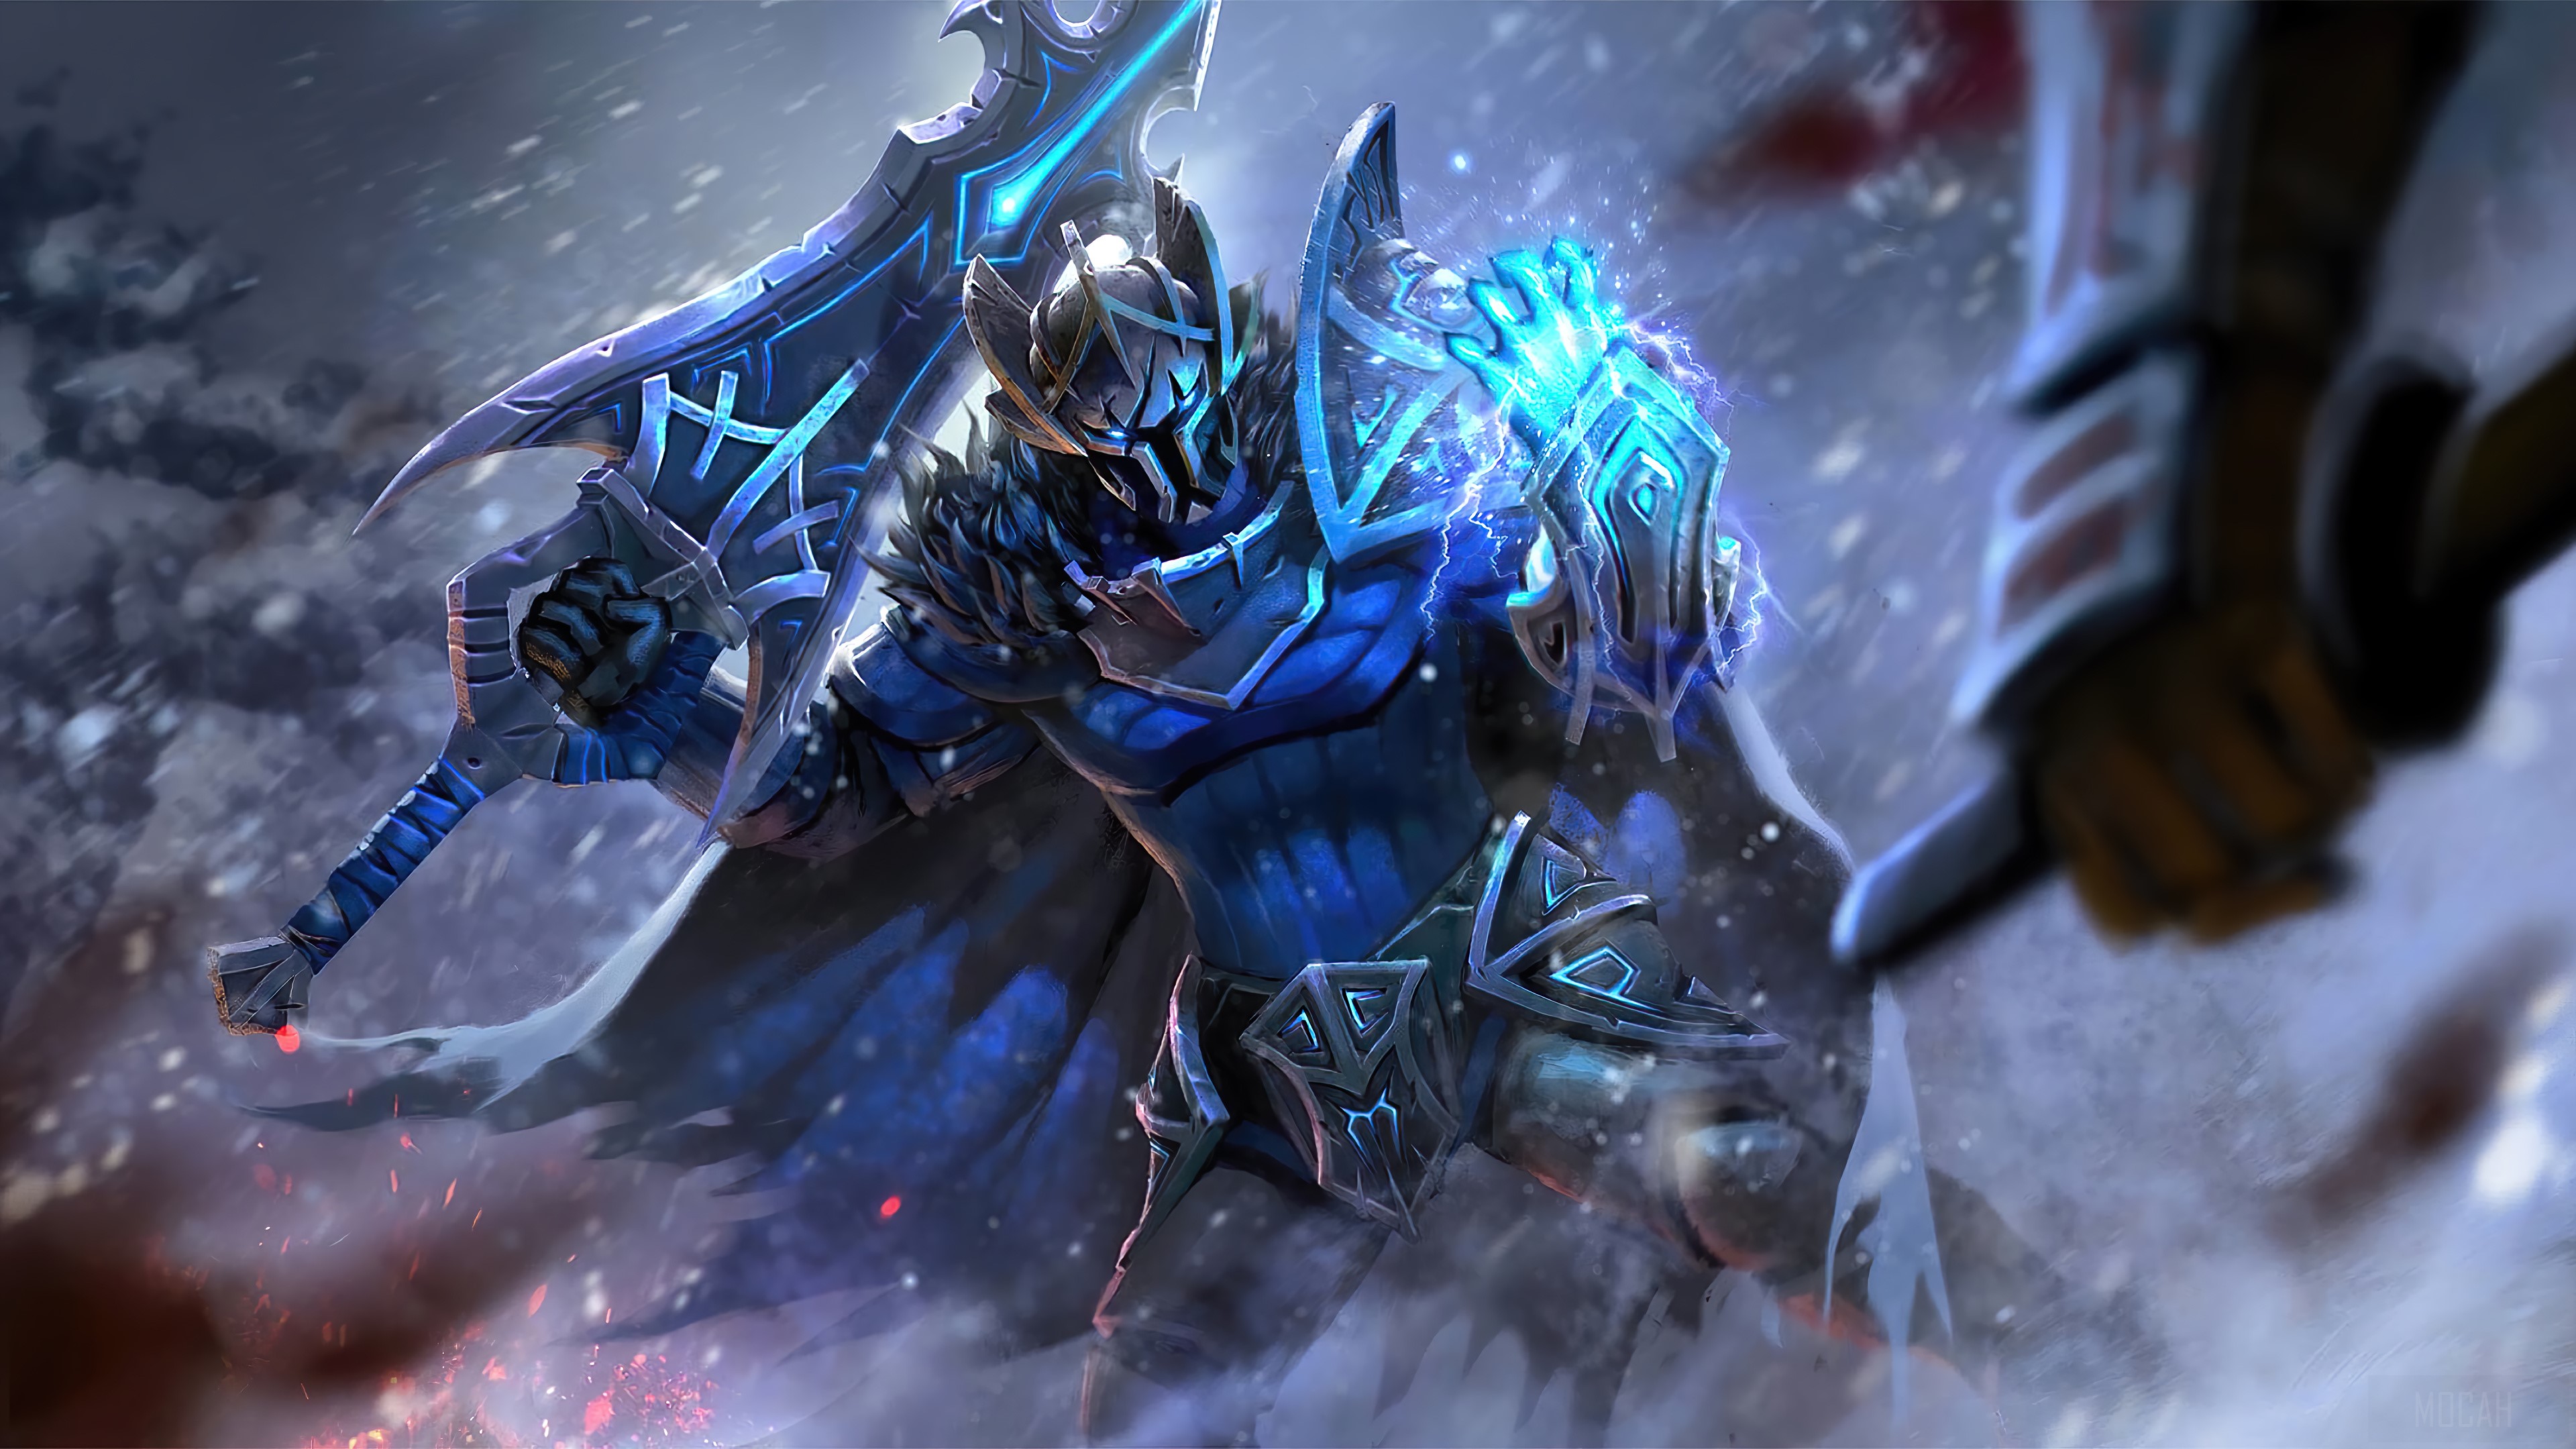 Sven, Rogue Knight, Dota Video Game, Defense of the Ancients, Guardian of the Holy Flame, Set 4k wallpaper HD Wallpaper